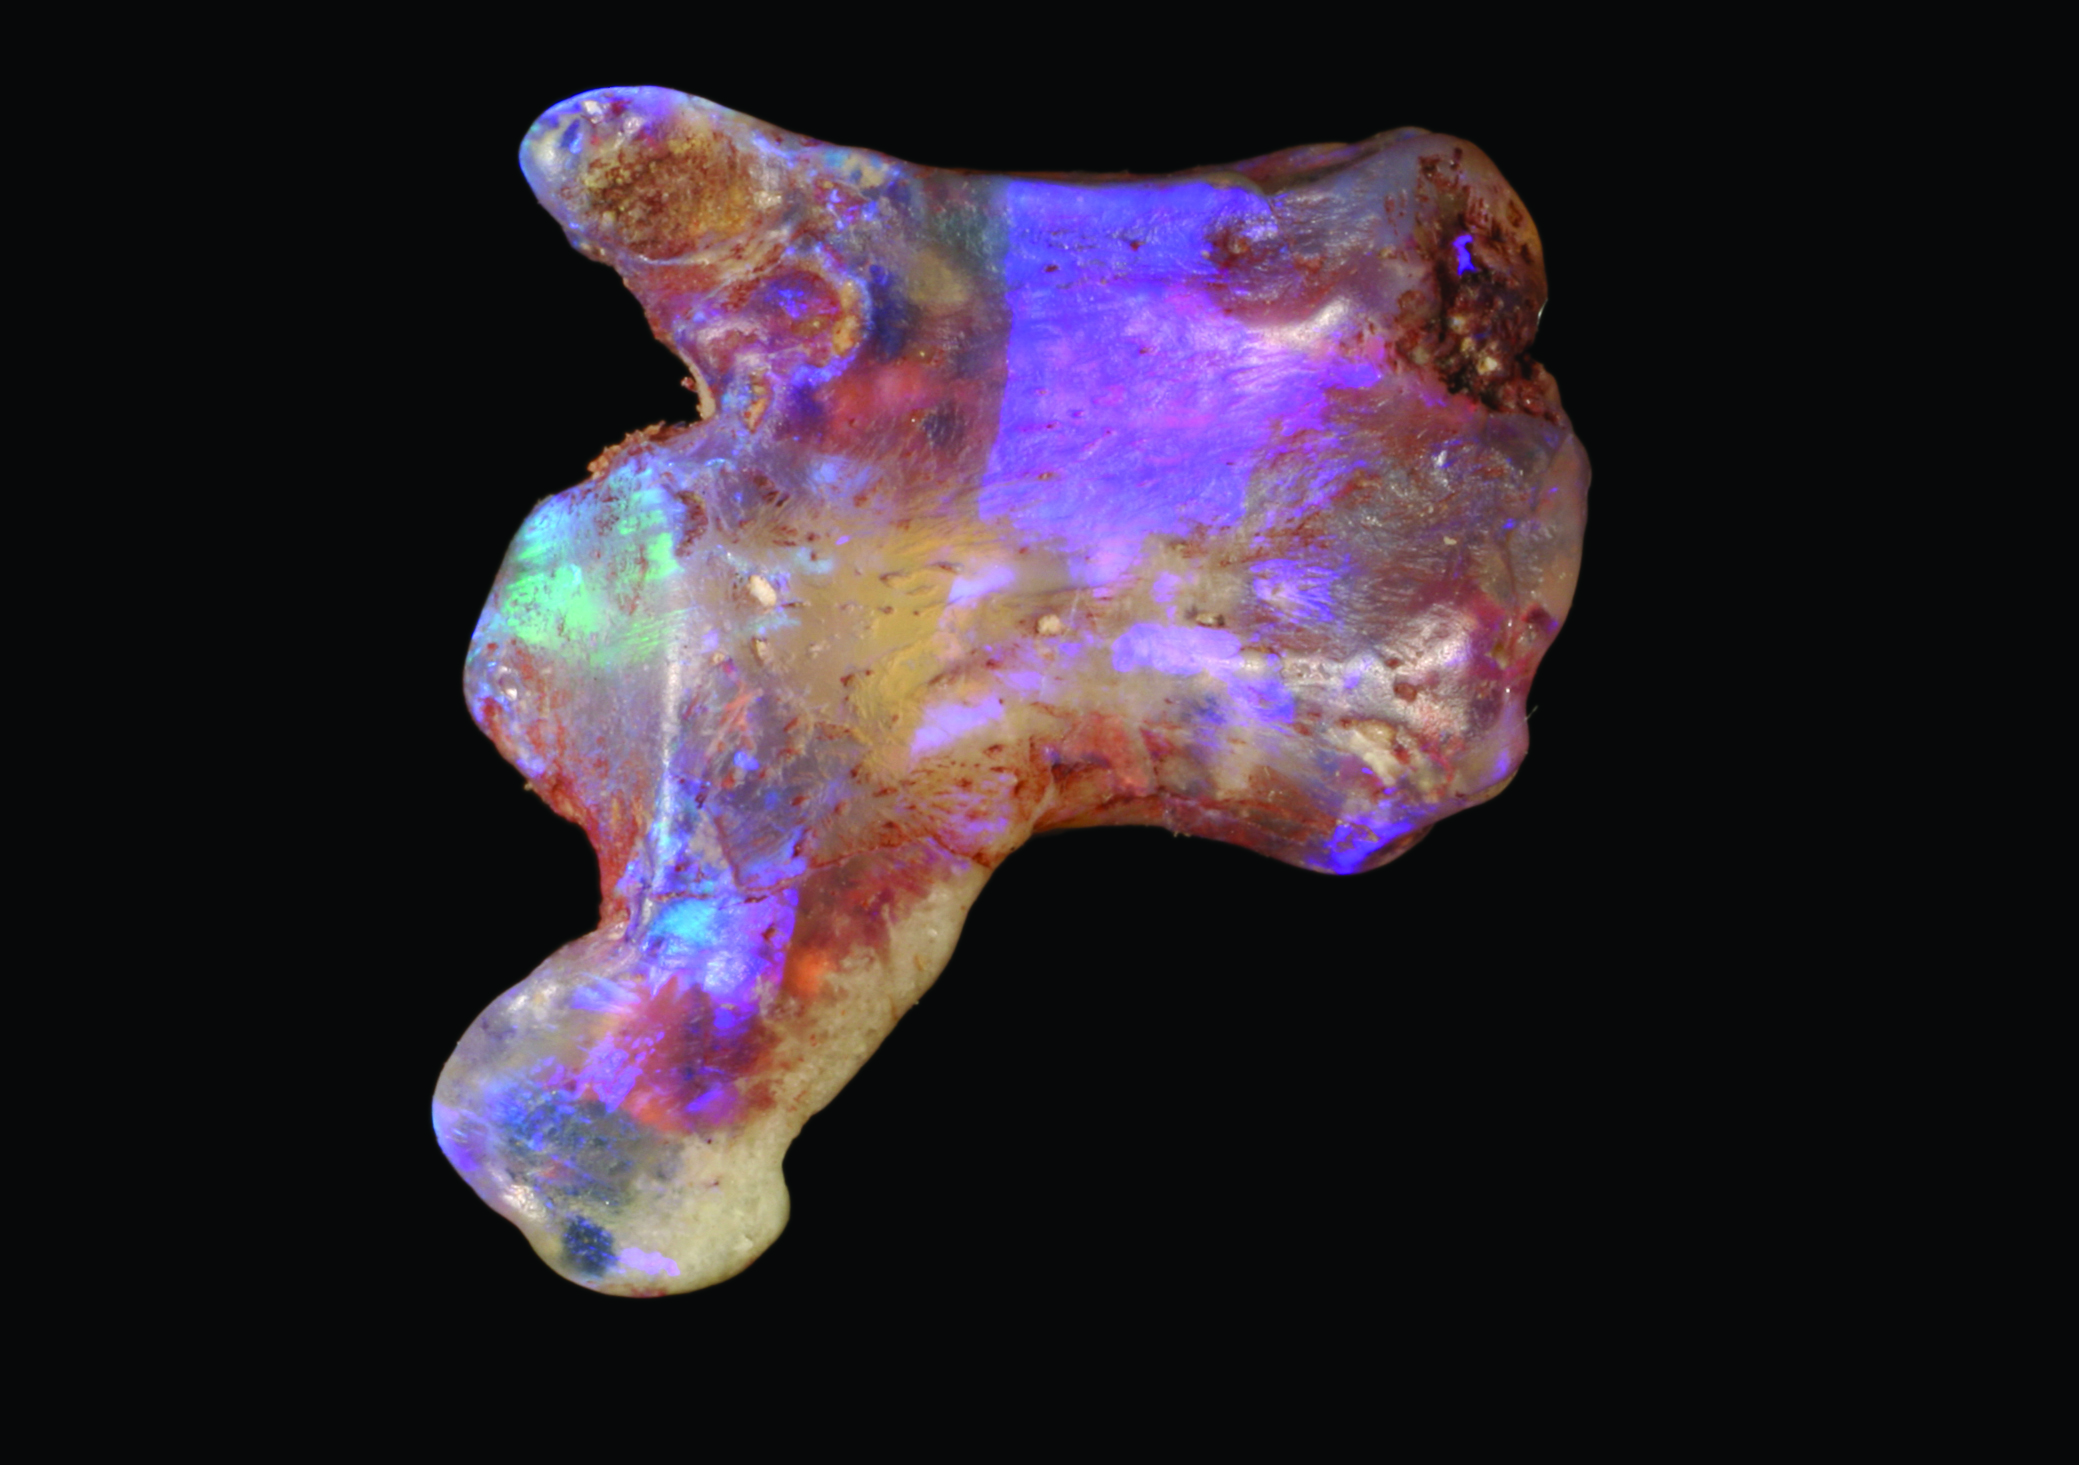 A translucent opalized fossil turtle tail bone, donated to the Australian Opal Center by opal miners Graeme and Christine Thompson. (Robert A. Smith / Australian Opal Center)